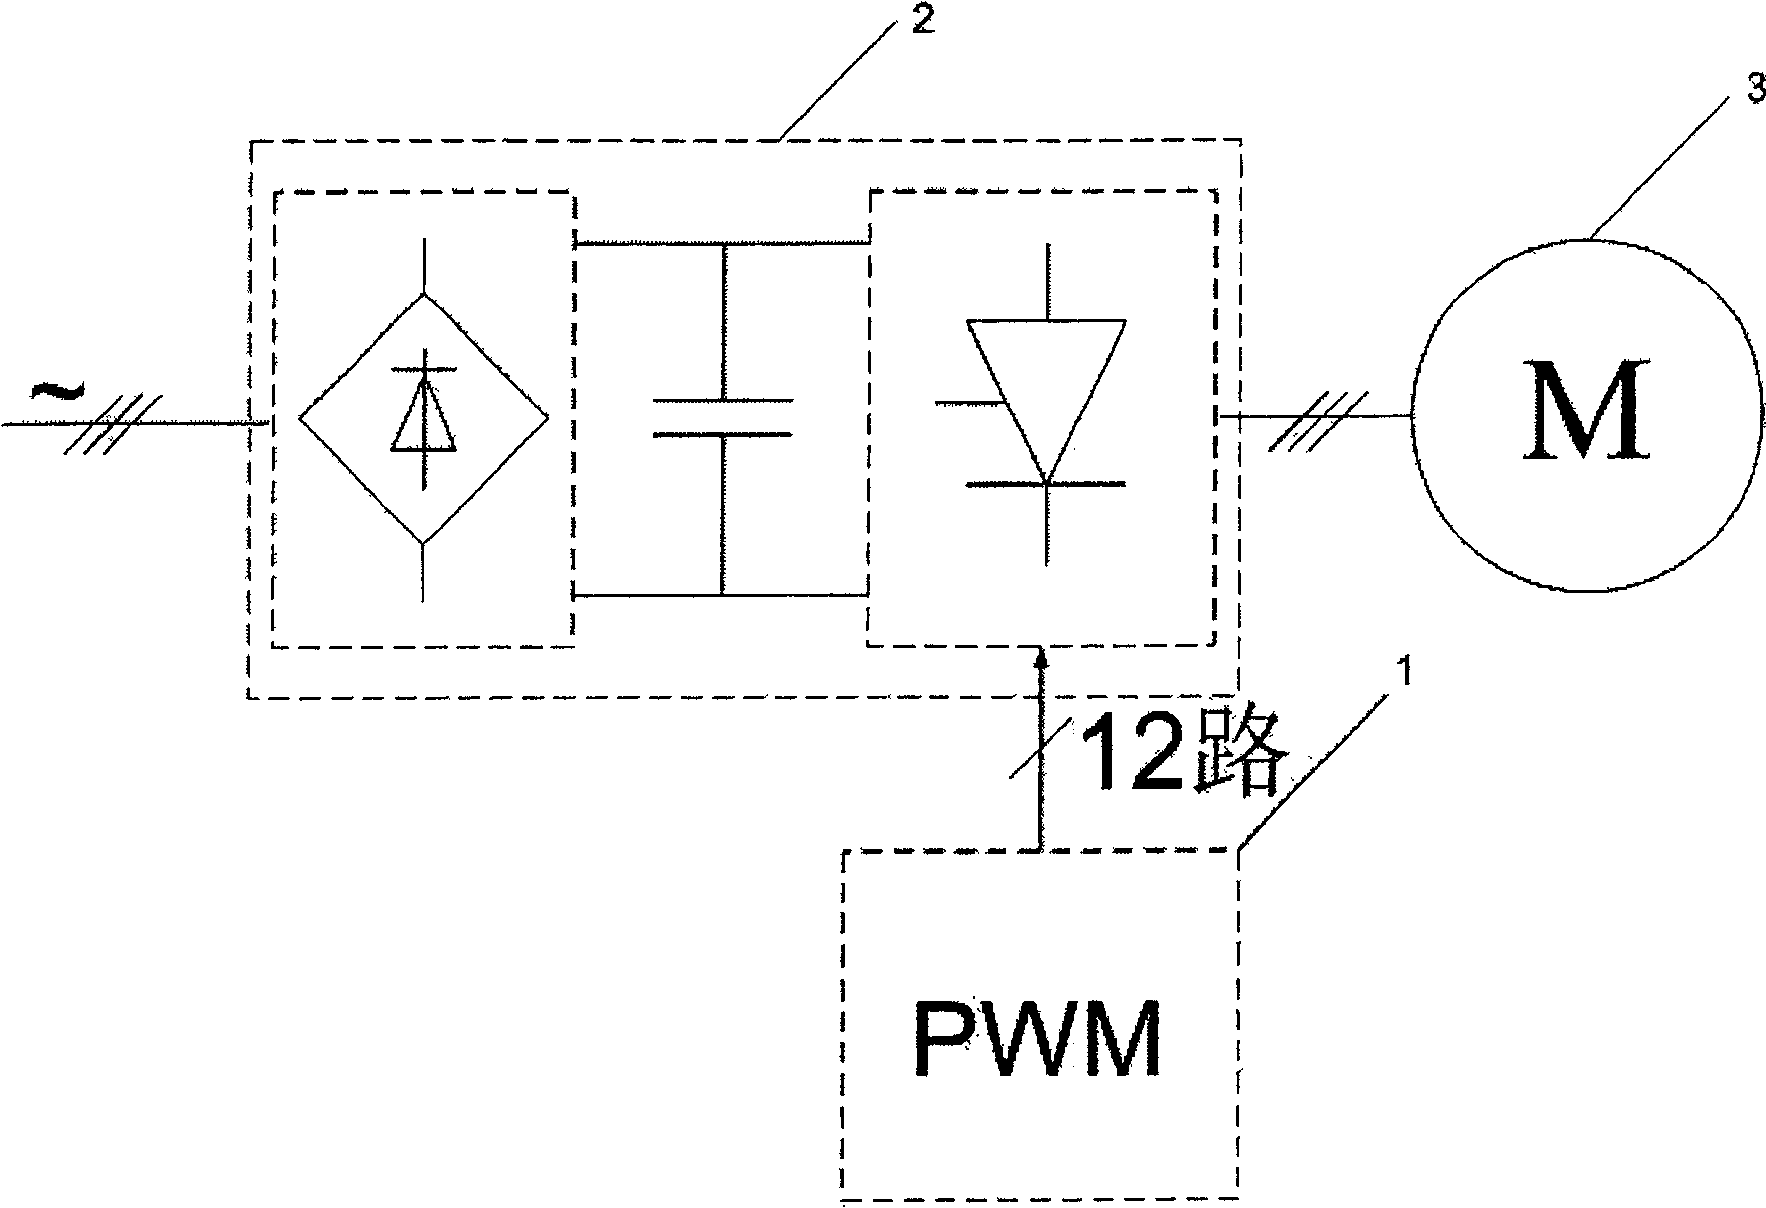 Voltage type variable-frequency control system using pulse width modulation synchronous switching